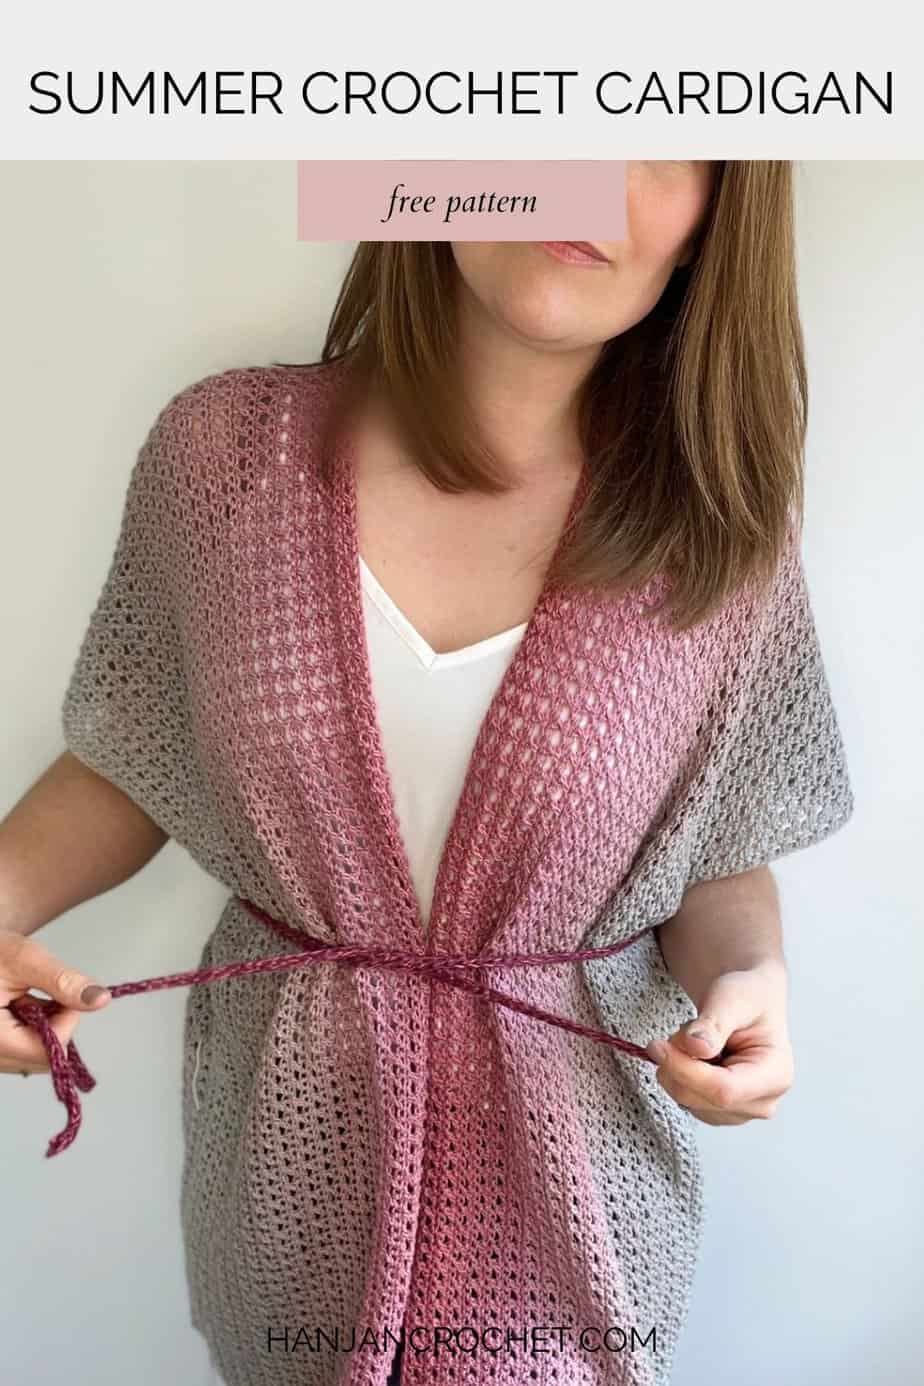 Woman wearing light crochet cardigan pattern with tie at the waist.